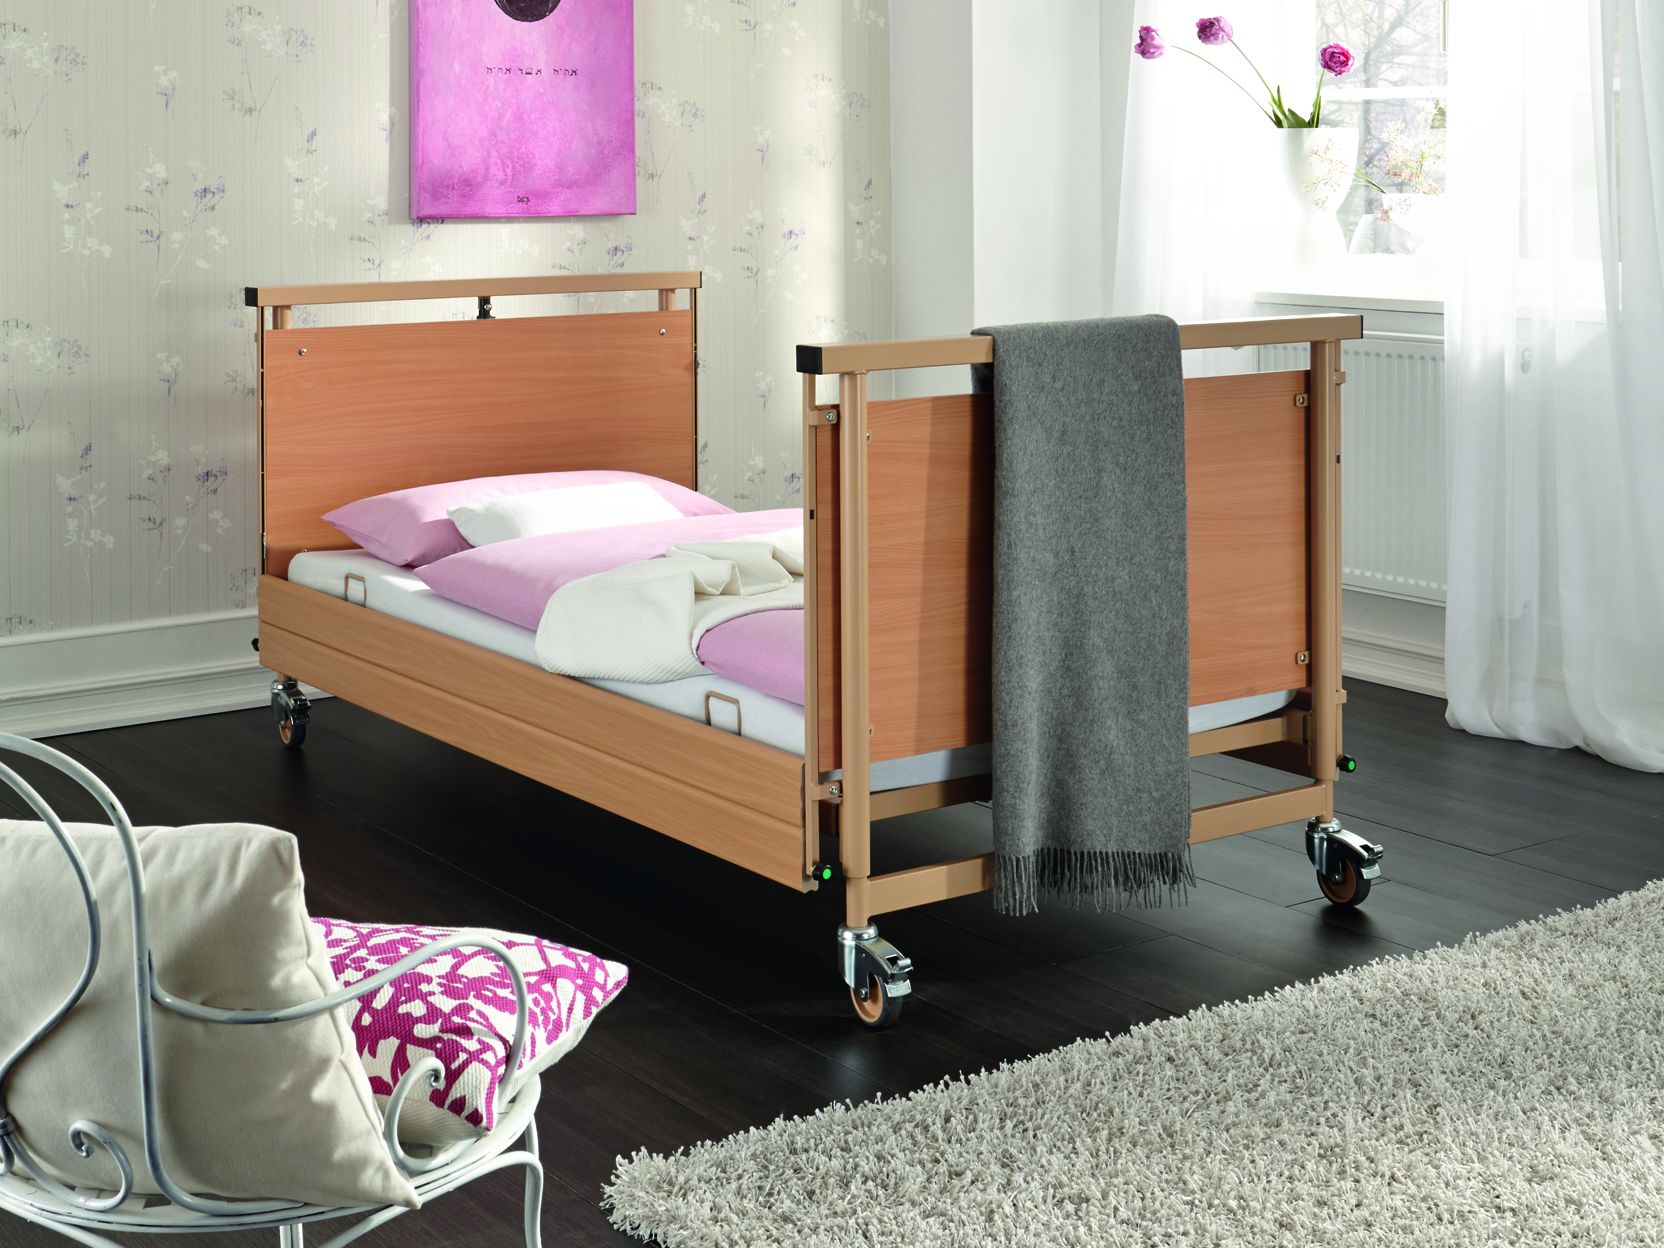 High safe working load of the Allura II heavy-duty bed